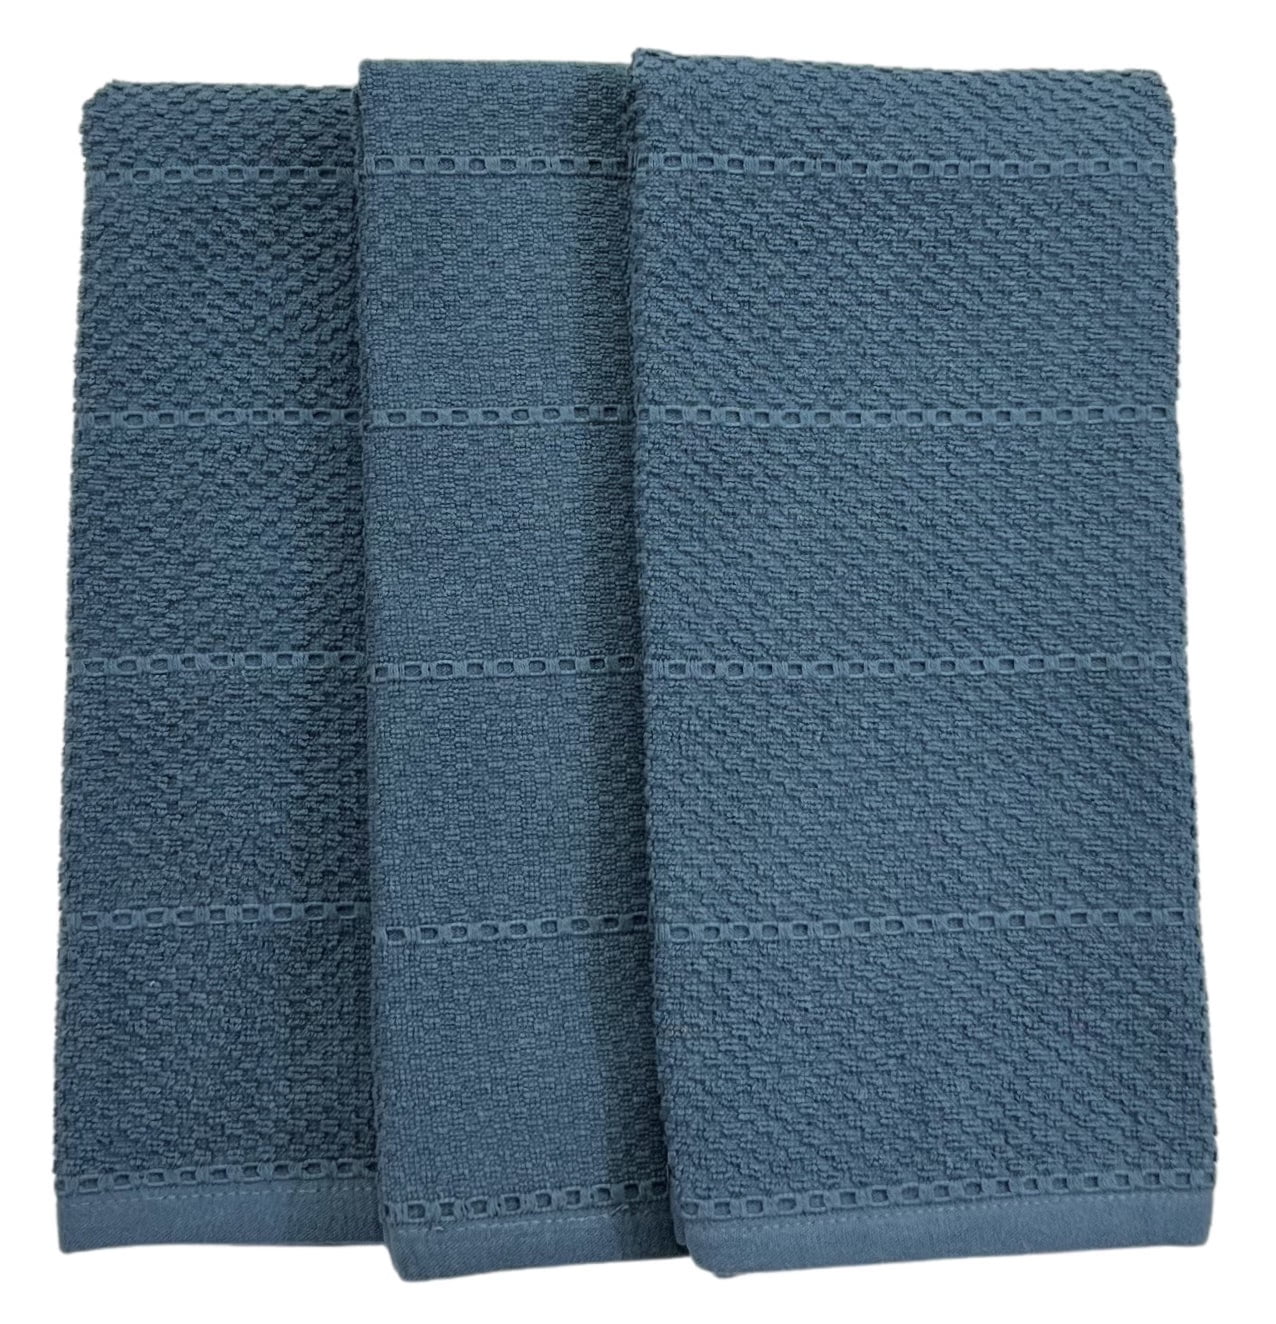 Serafina Home Hunter Green Kitchen Towels: 100% Cotton Soft Absorbent Terry Cloth, Set of 3, Size: 16 x 26